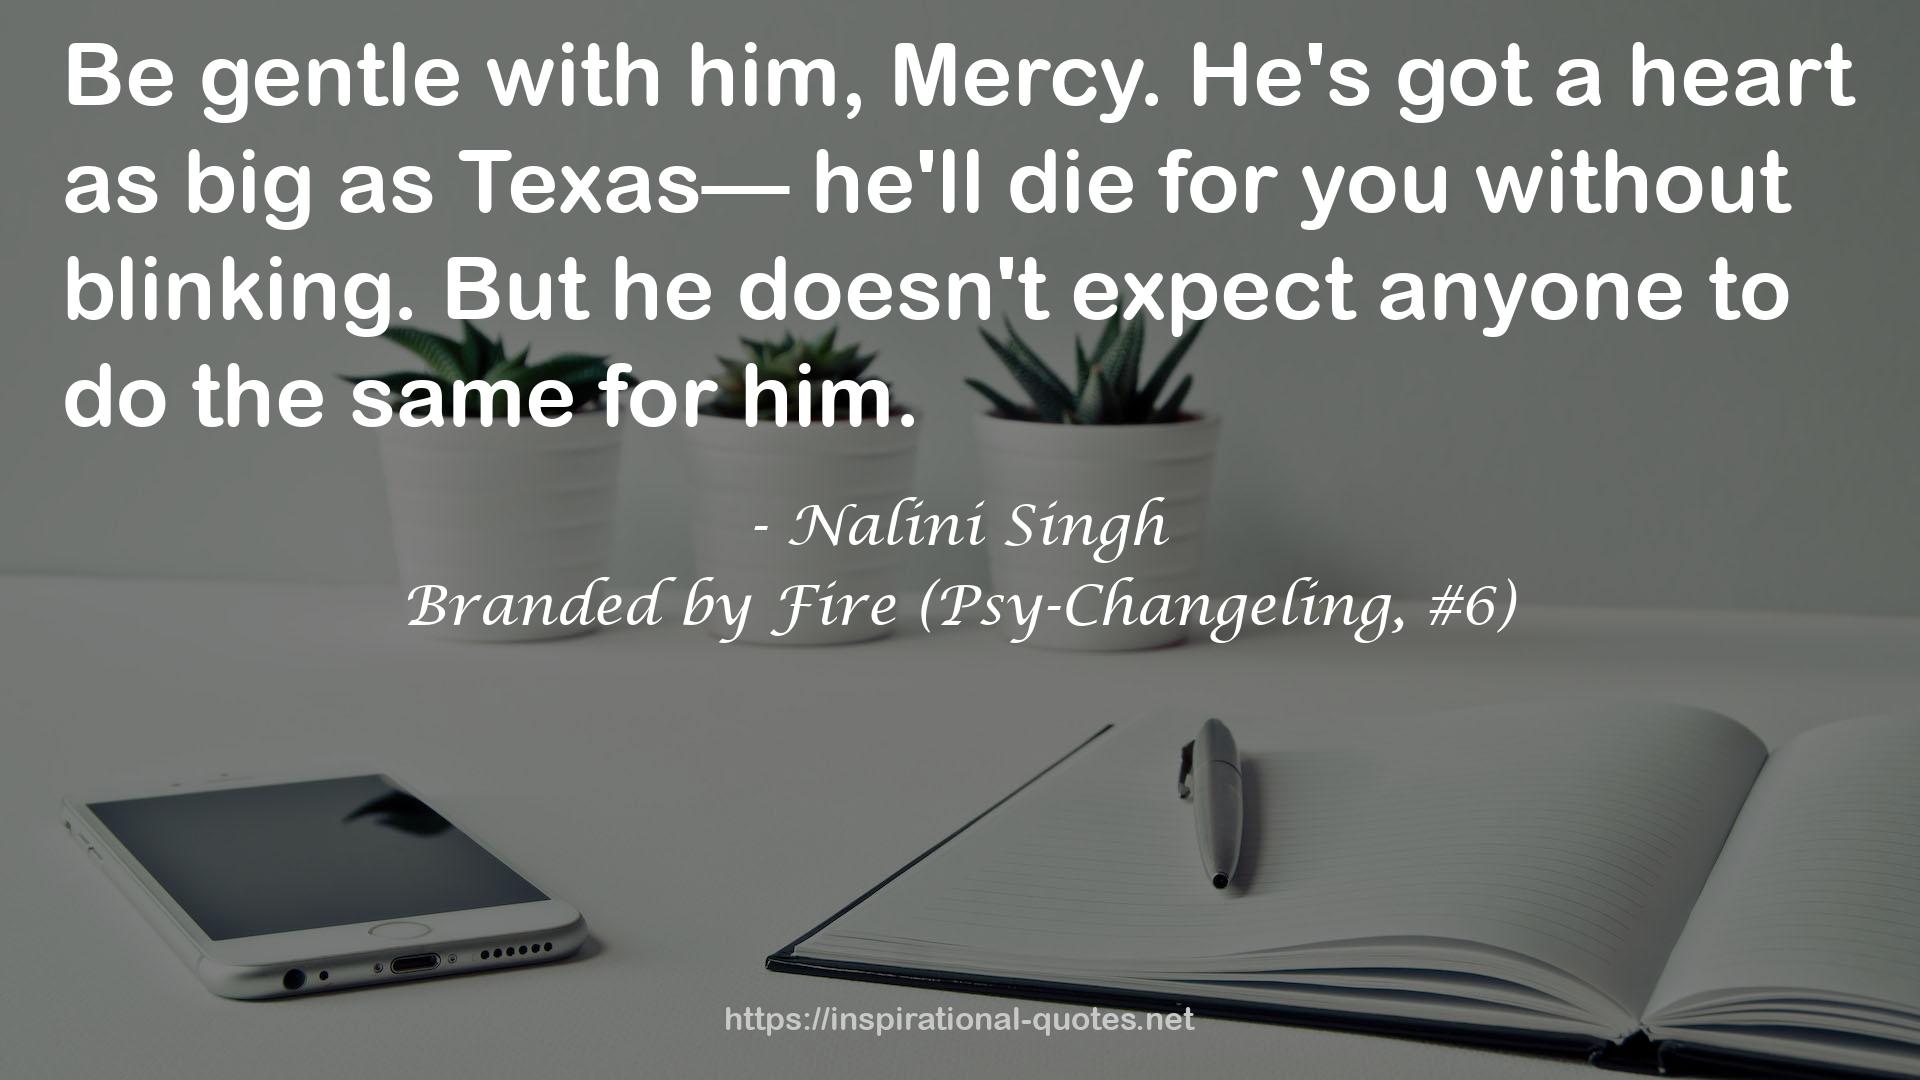 Branded by Fire (Psy-Changeling, #6) QUOTES